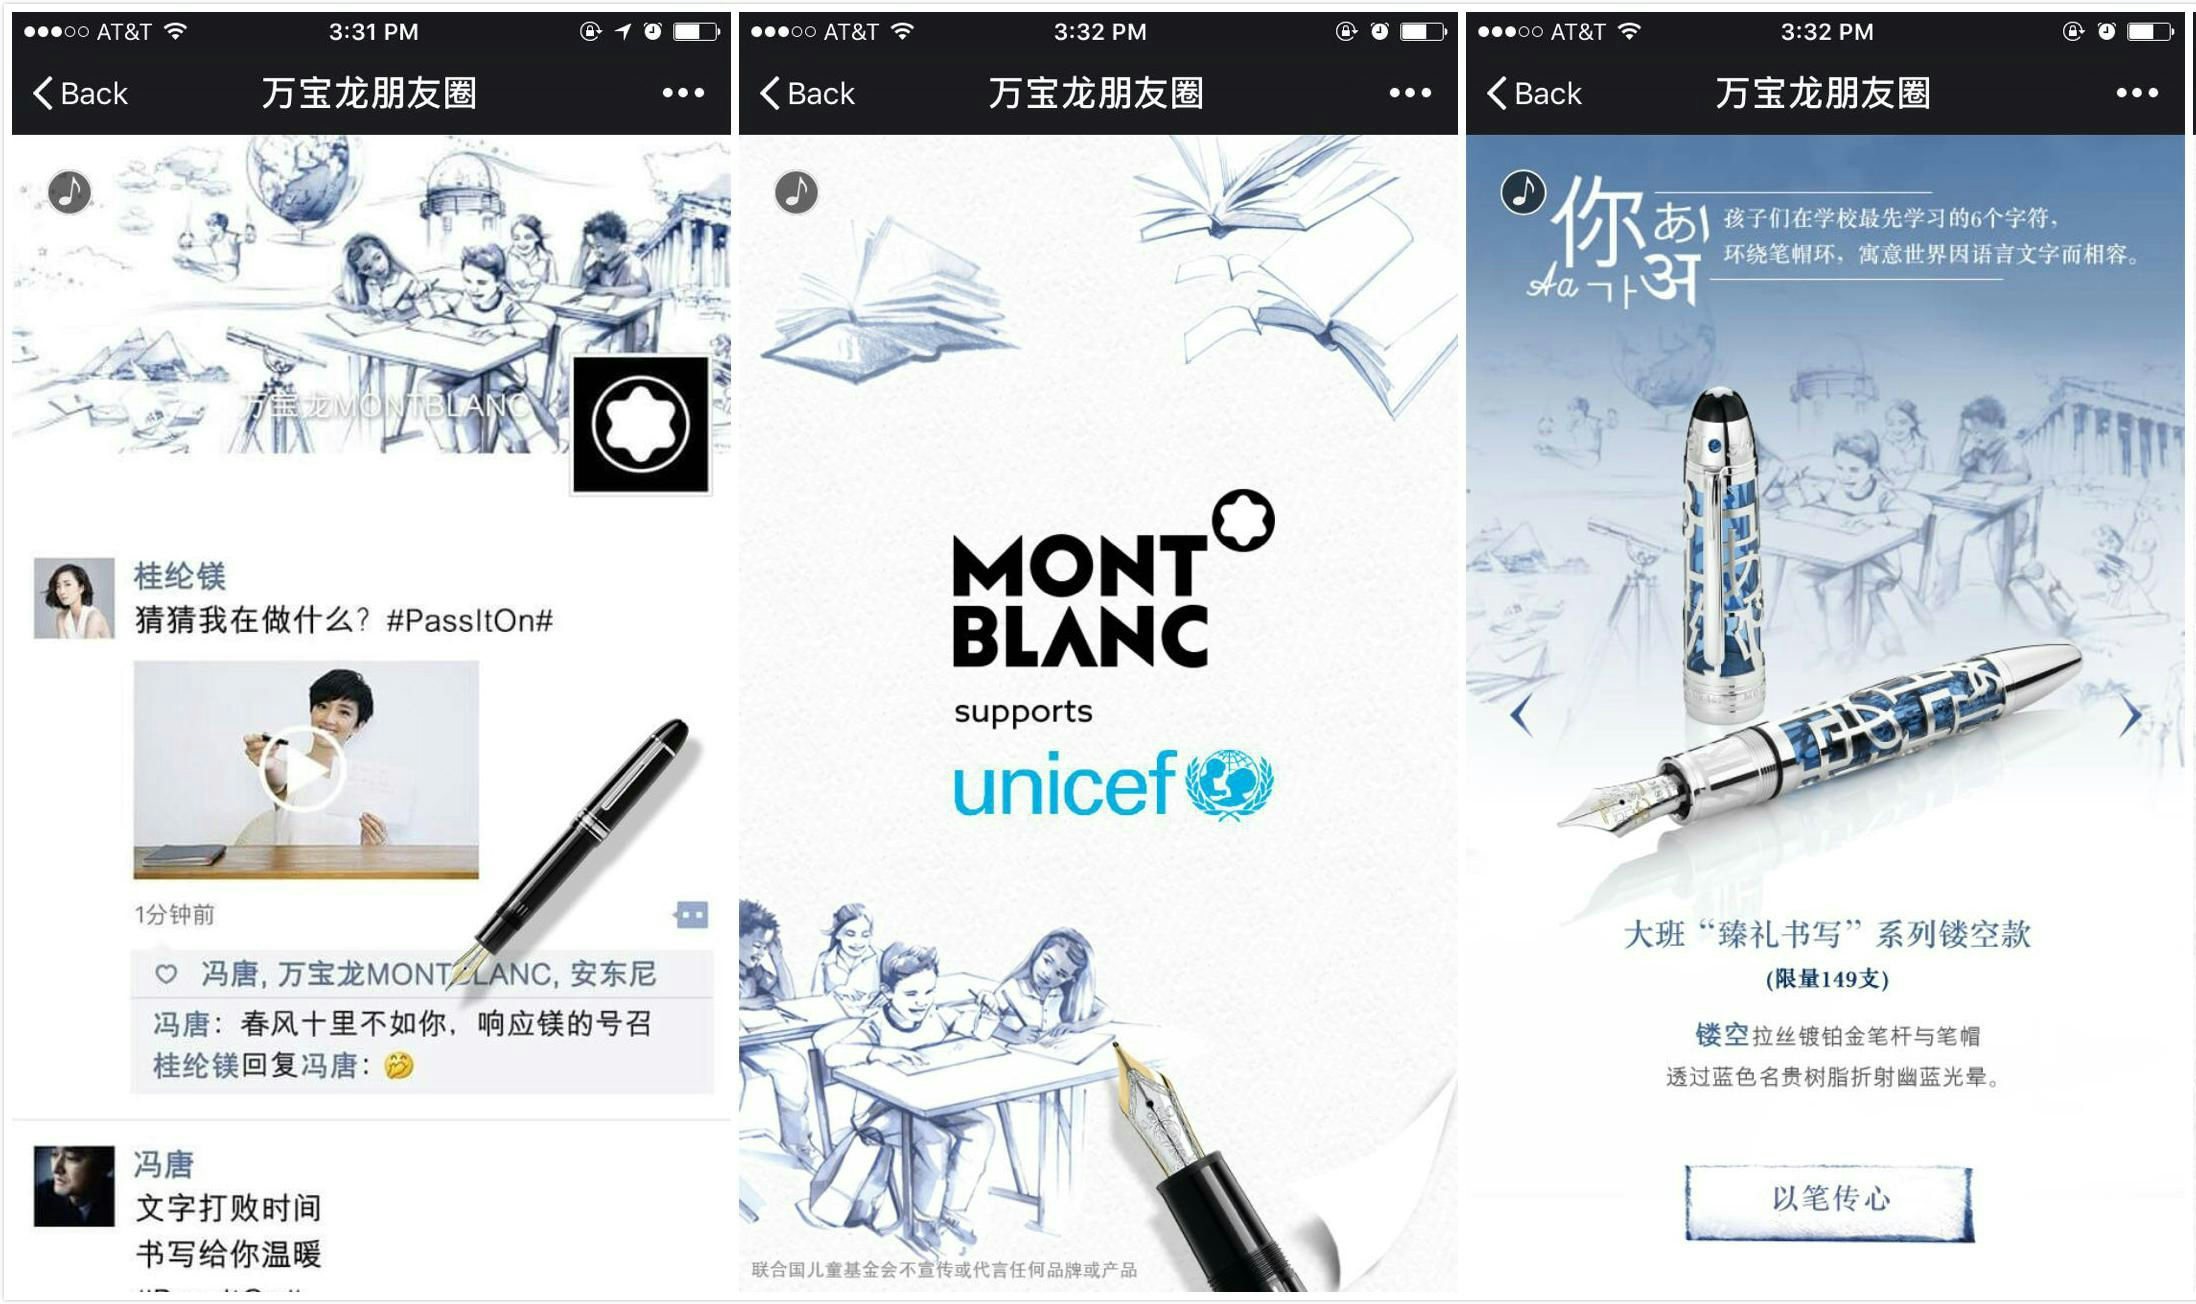 This interactive campaign by Montblanc is part of the brand's global collaboration with UNICEF.